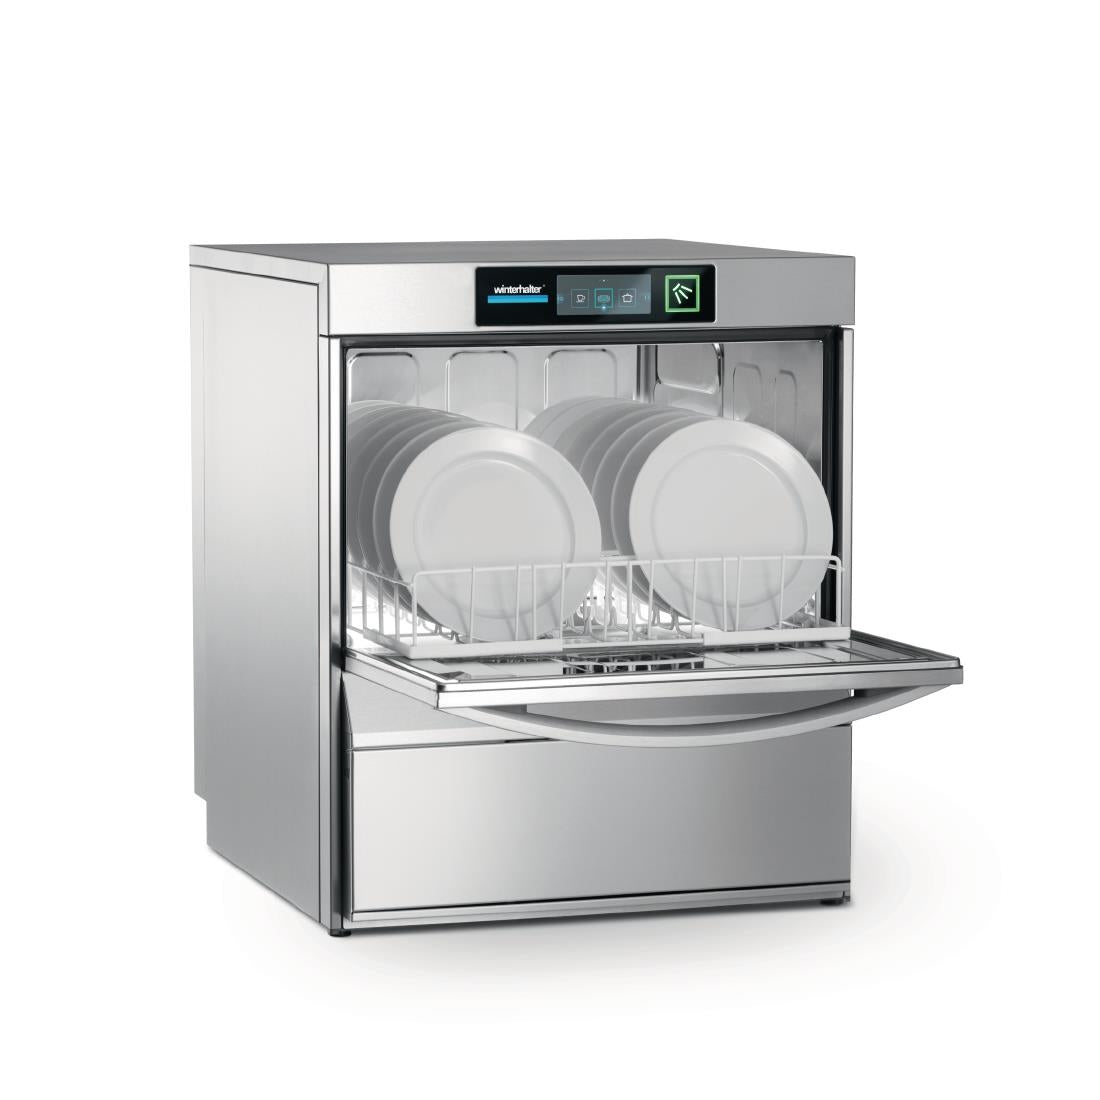 FD310 Winterhalter Undercounter Thermal Disinfection Dishwasher UC-M-E JD Catering Equipment Solutions Ltd